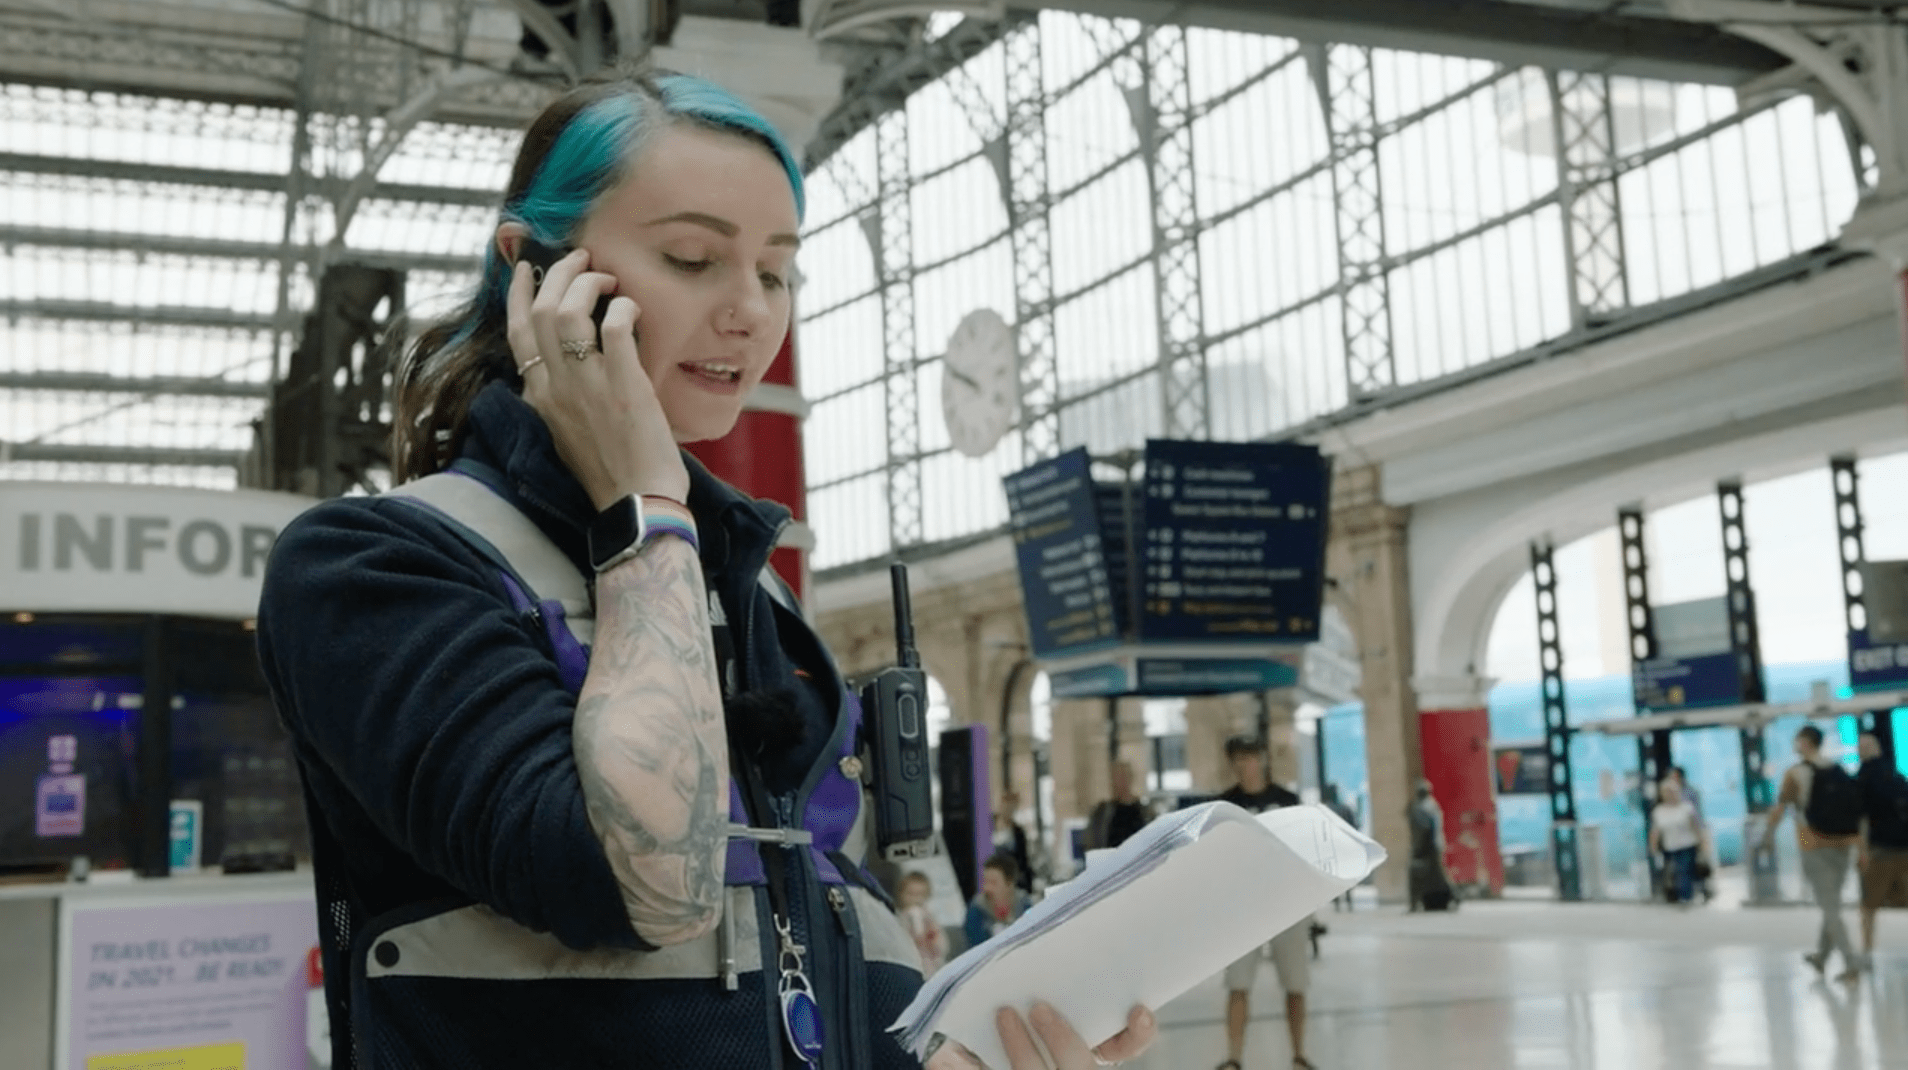 A customer services assistant on a phone call on the concourse at Liverpool Lime Street station, daytime